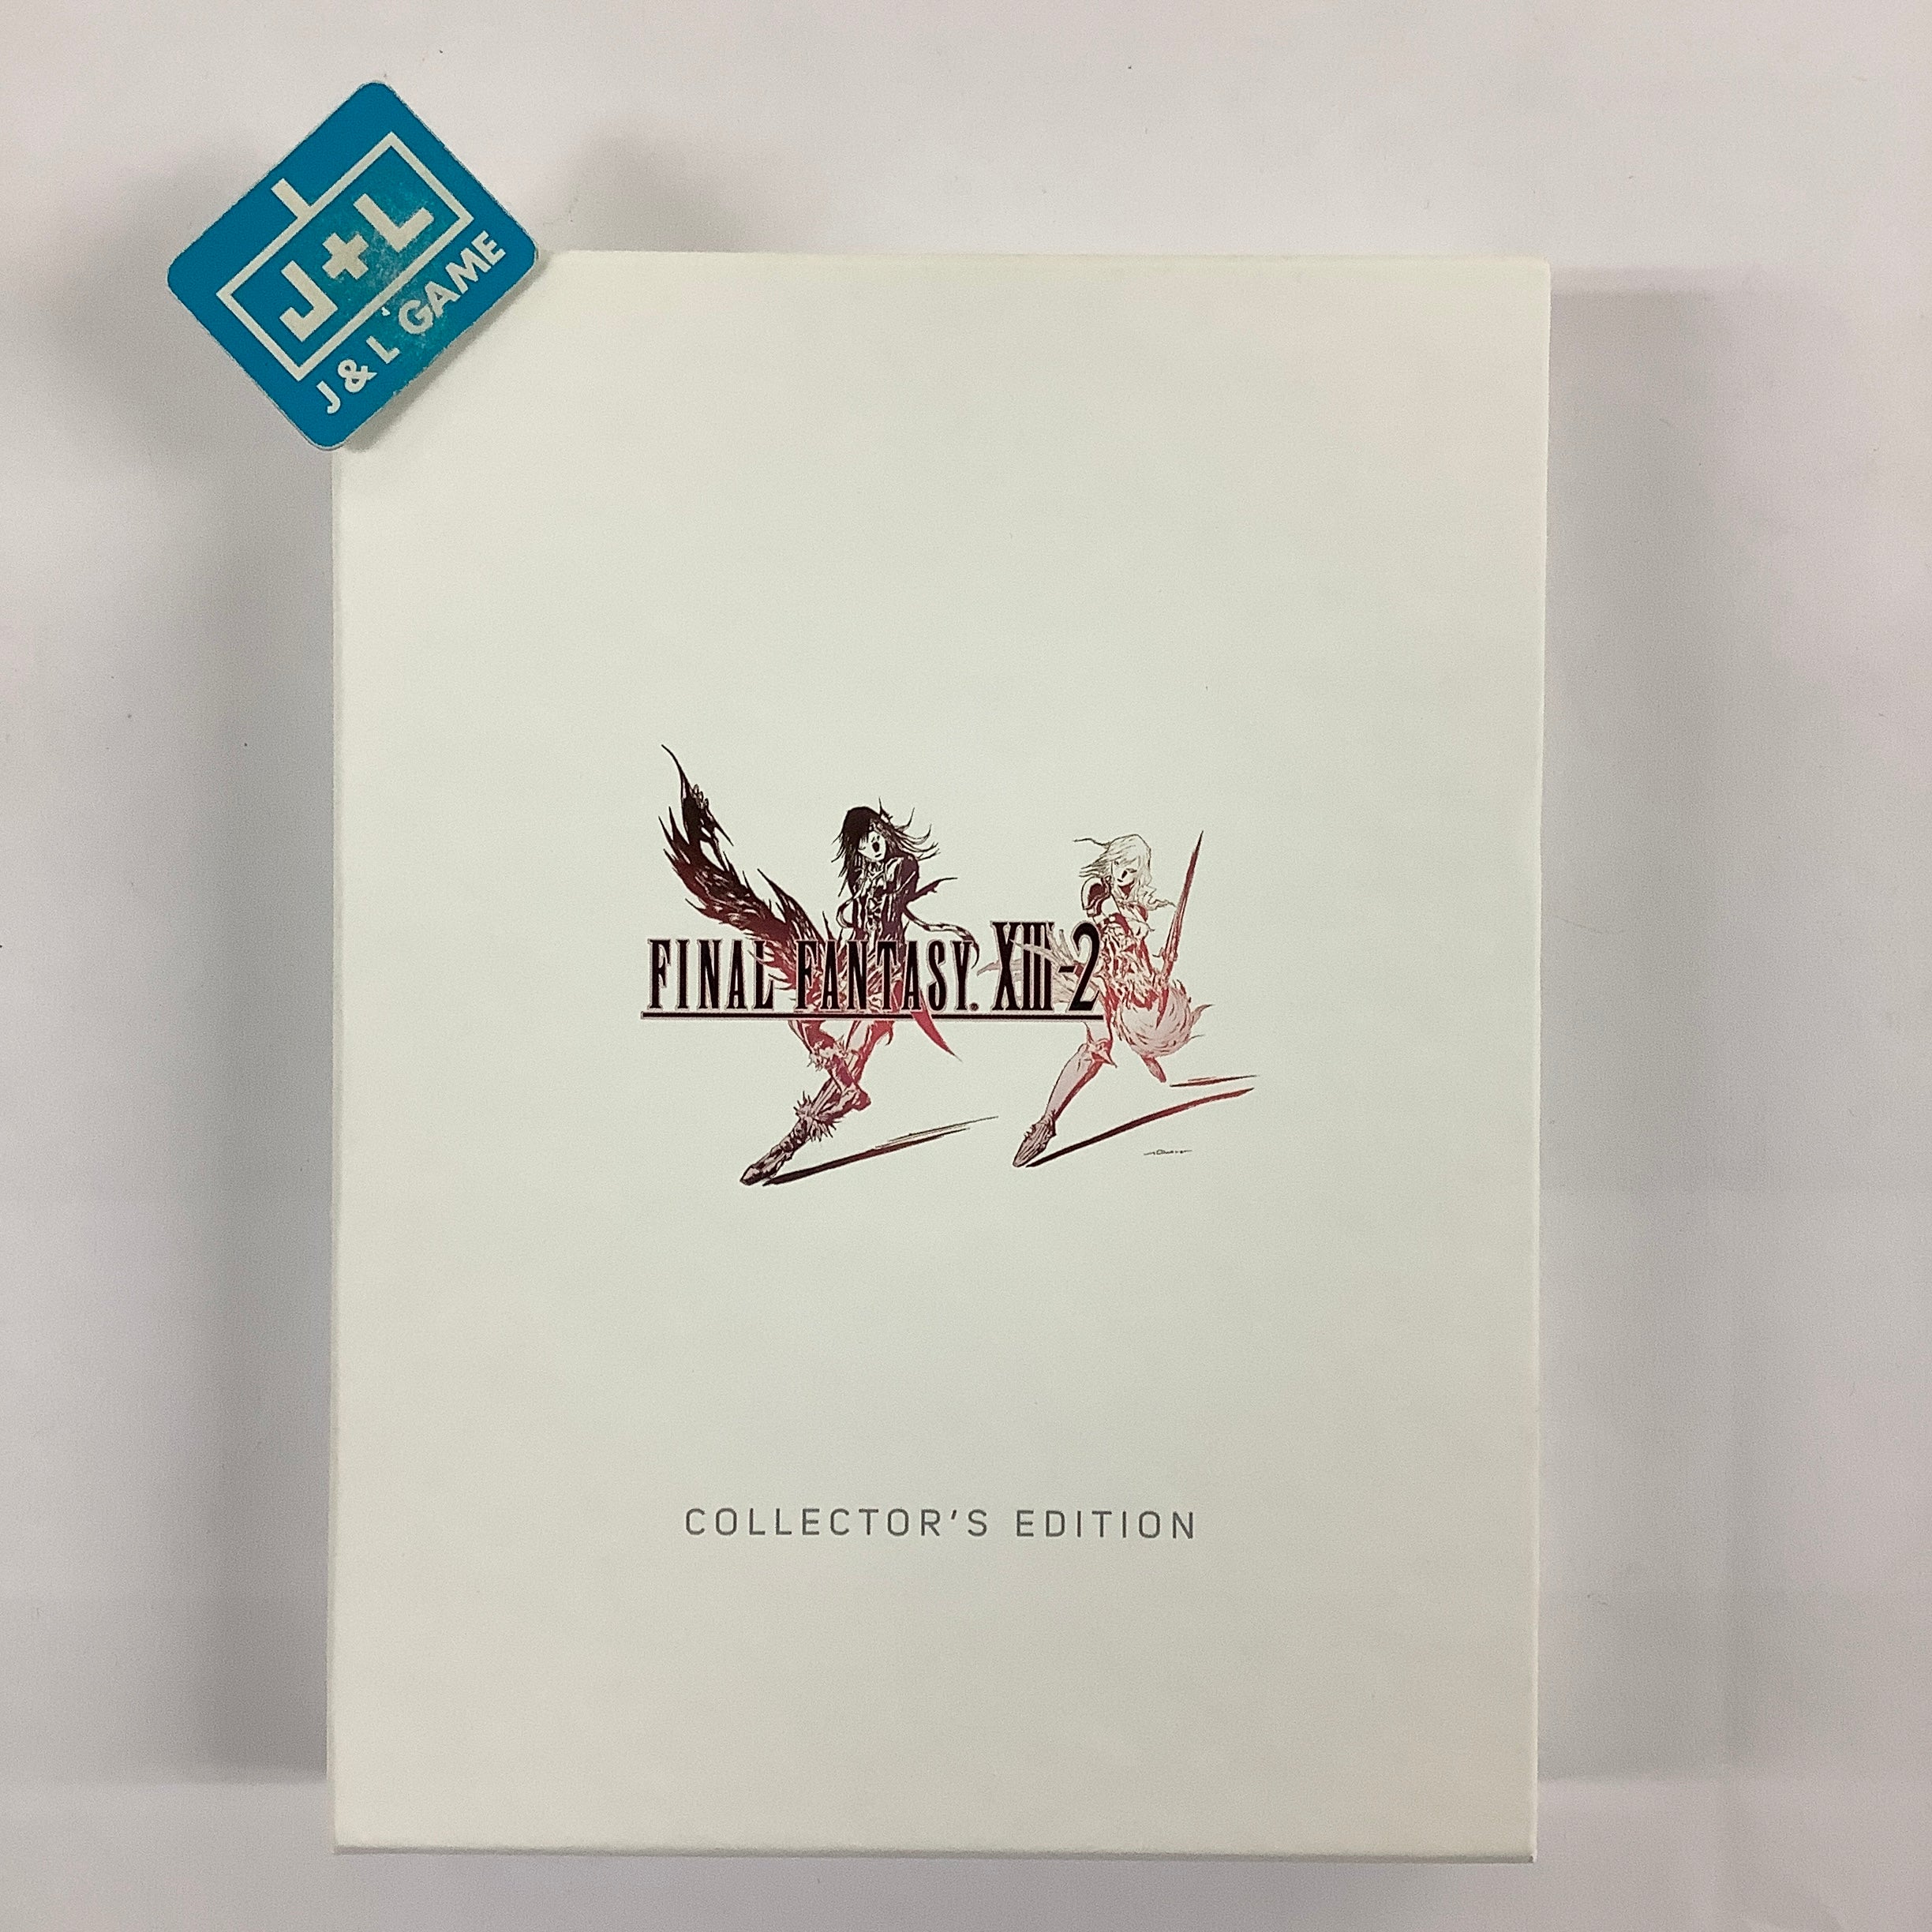 Final Fantasy XIII-2 (Limited Collector's Edition) - (PS3) PlayStation 3 [Pre-Owned] Video Games Square Enix   